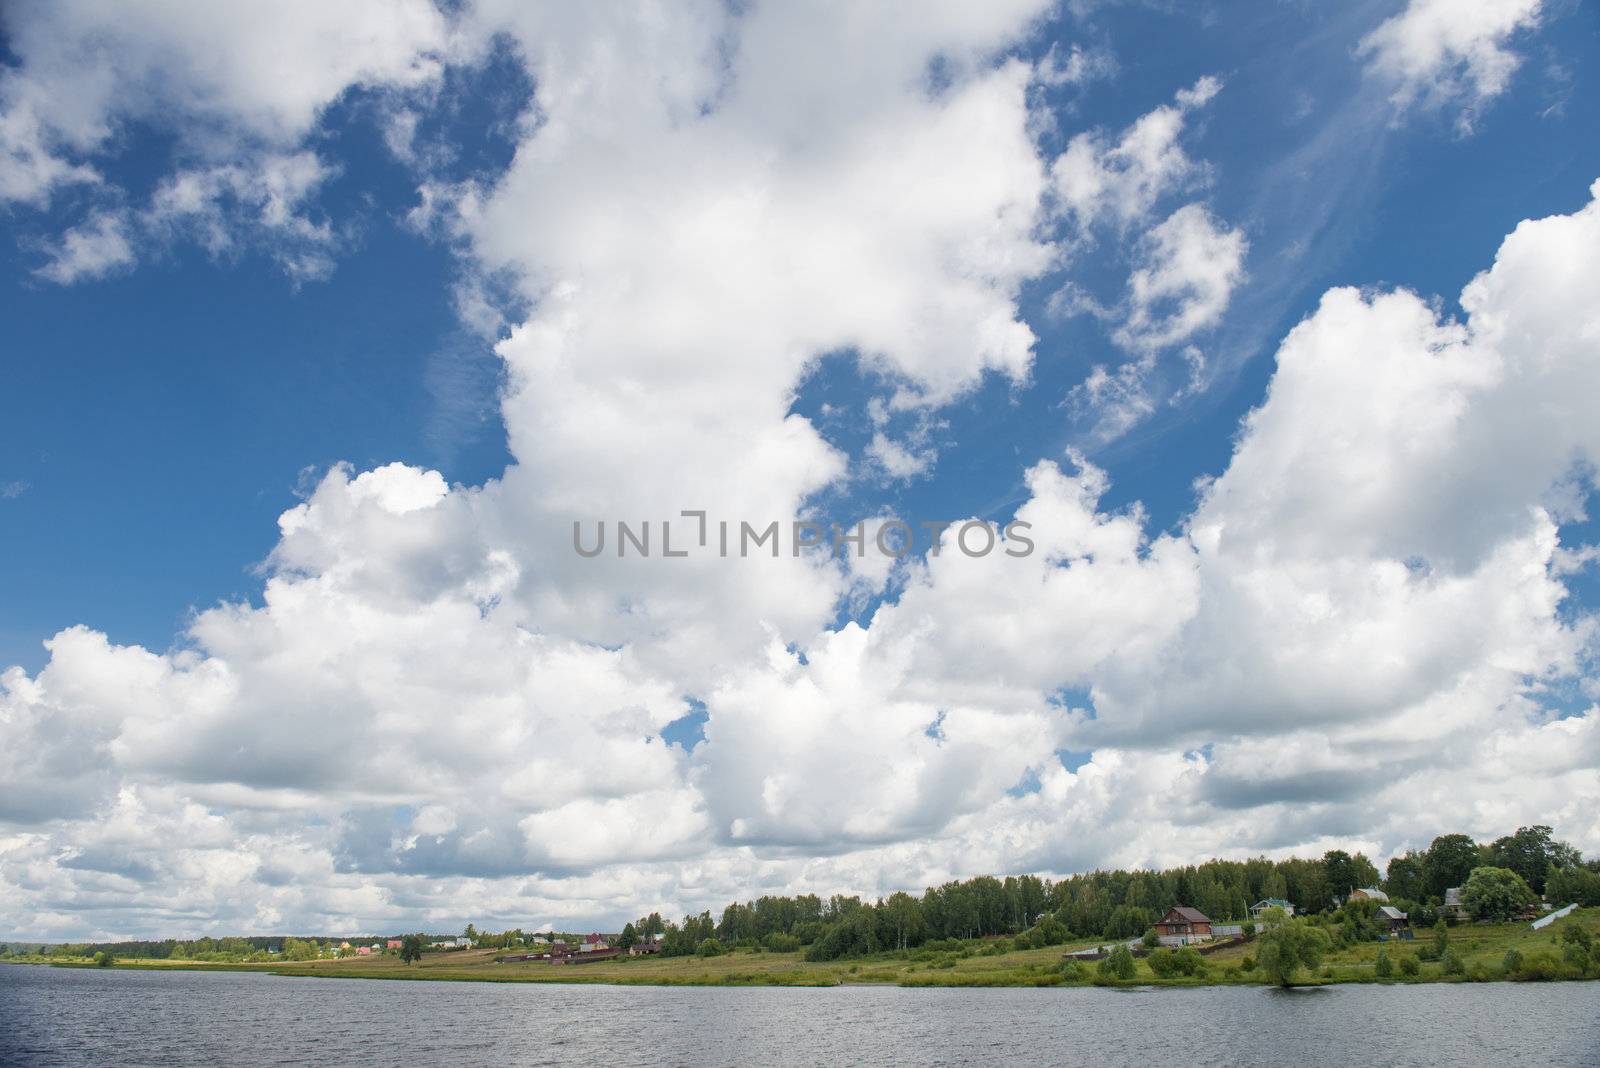 Clouds on the Volga river. Taken on July 2012.